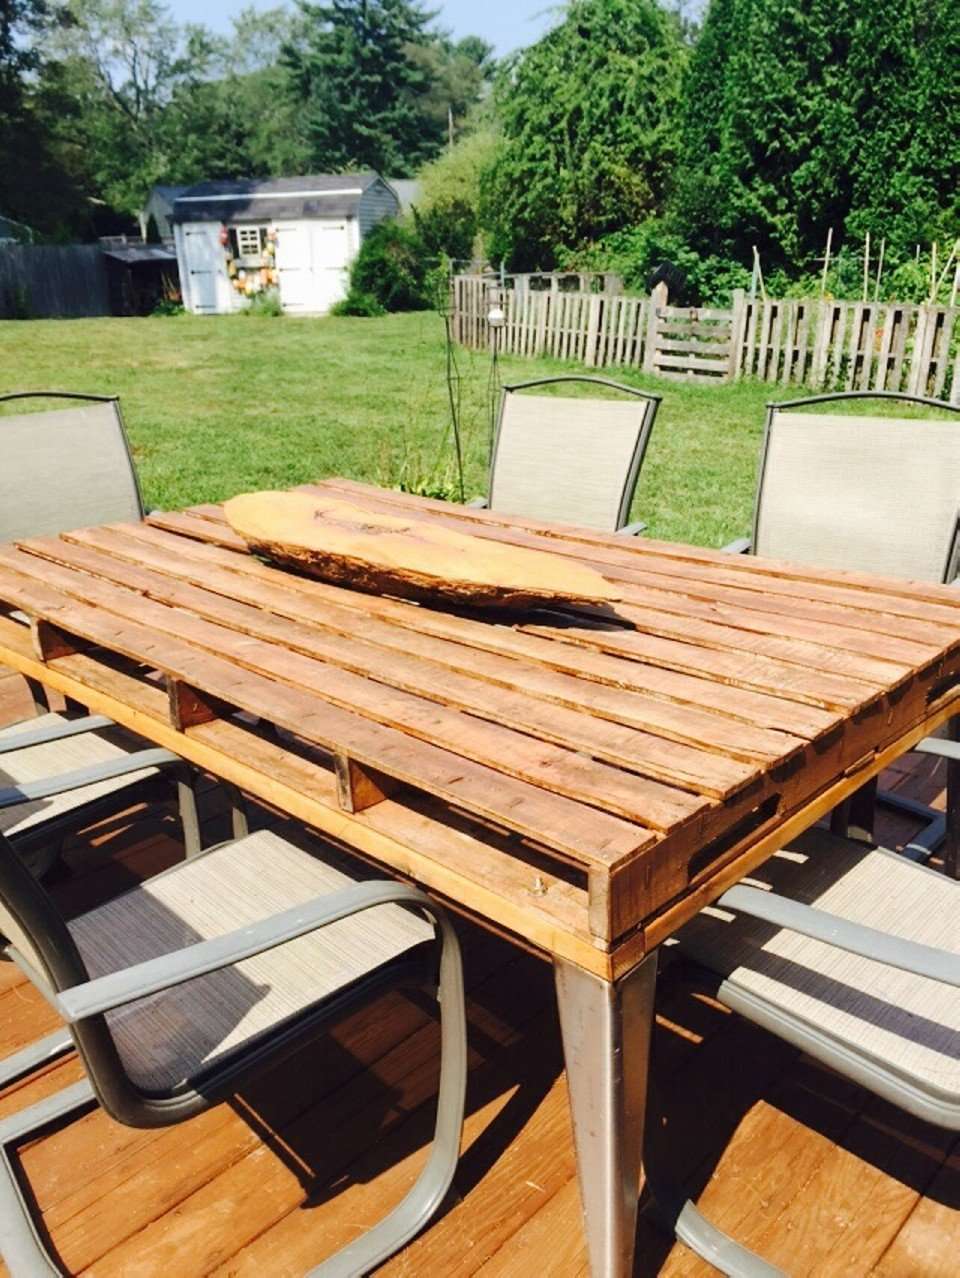 Patio Coffee Table Out of Wooden Pallets